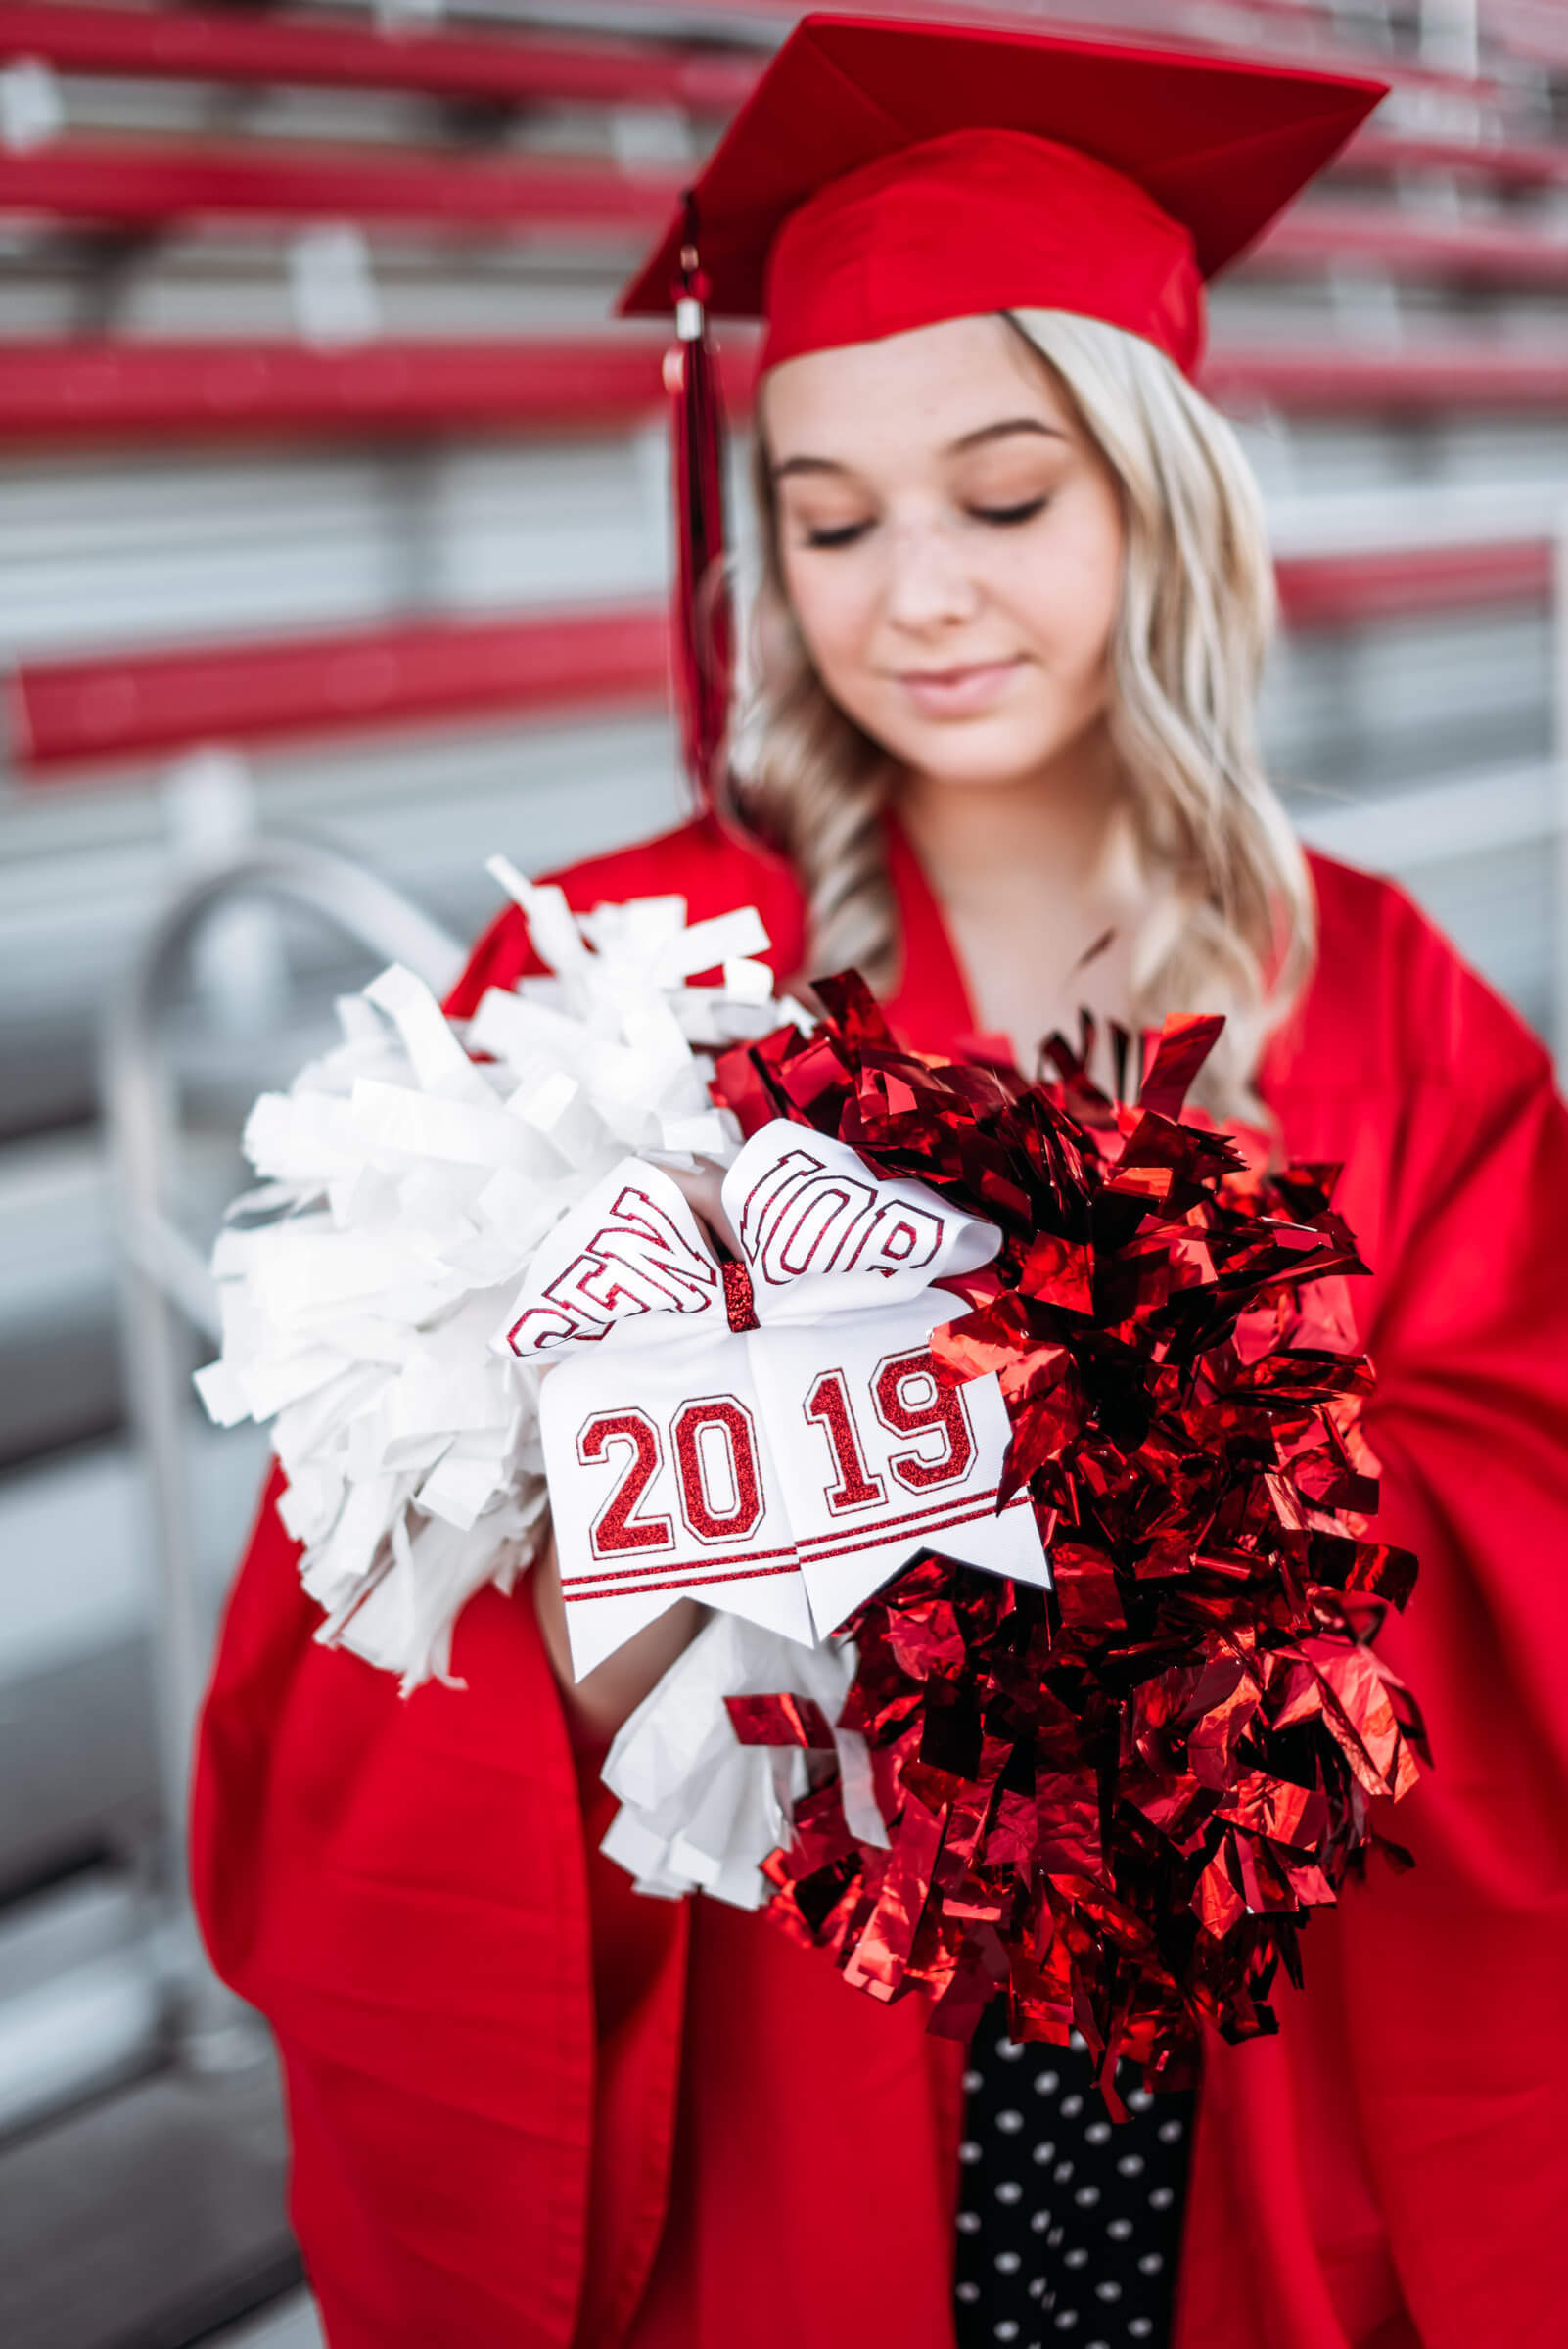 blonde girl with red graduation cap and gown on looking at cheer pom poms